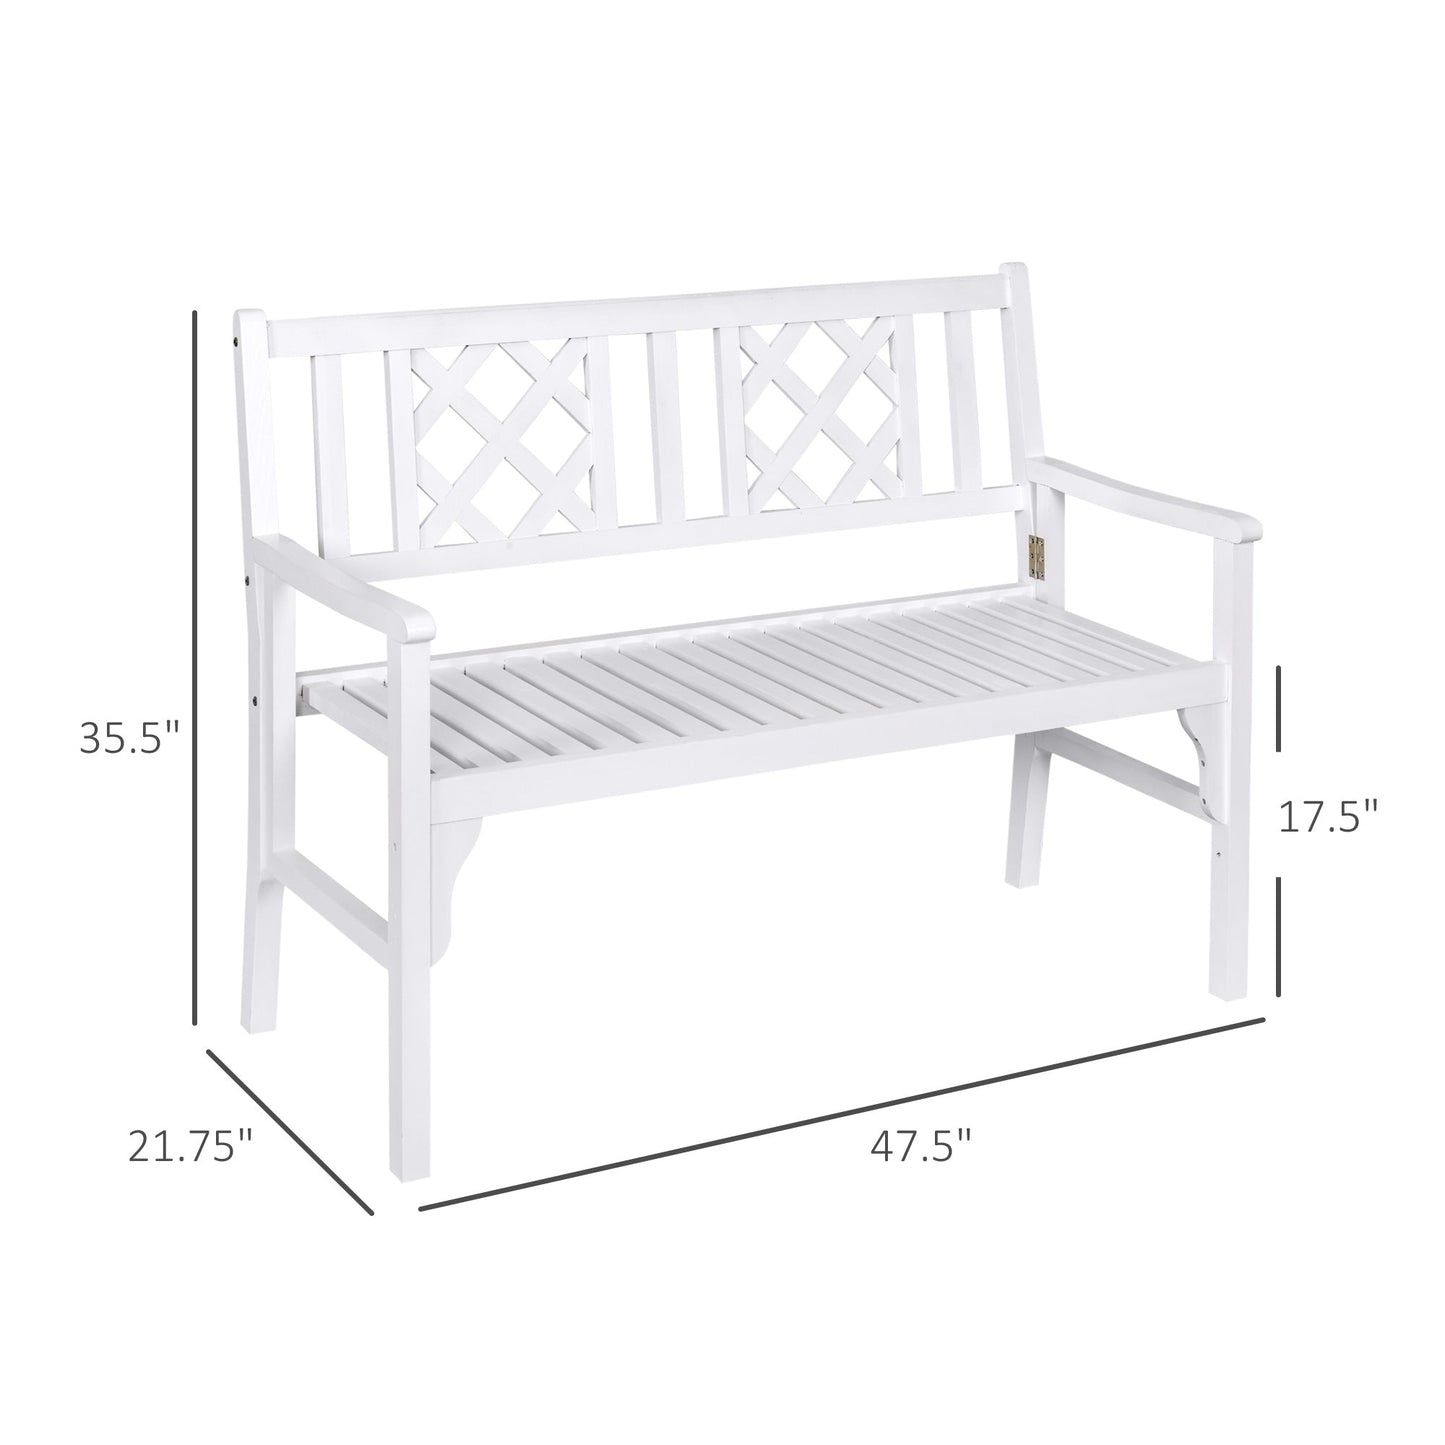 Outdoor and Garden-Amazing Outdoor Foldable Garden Bench, 2-Seater Patio Wooden Bench - Outdoor Style Company